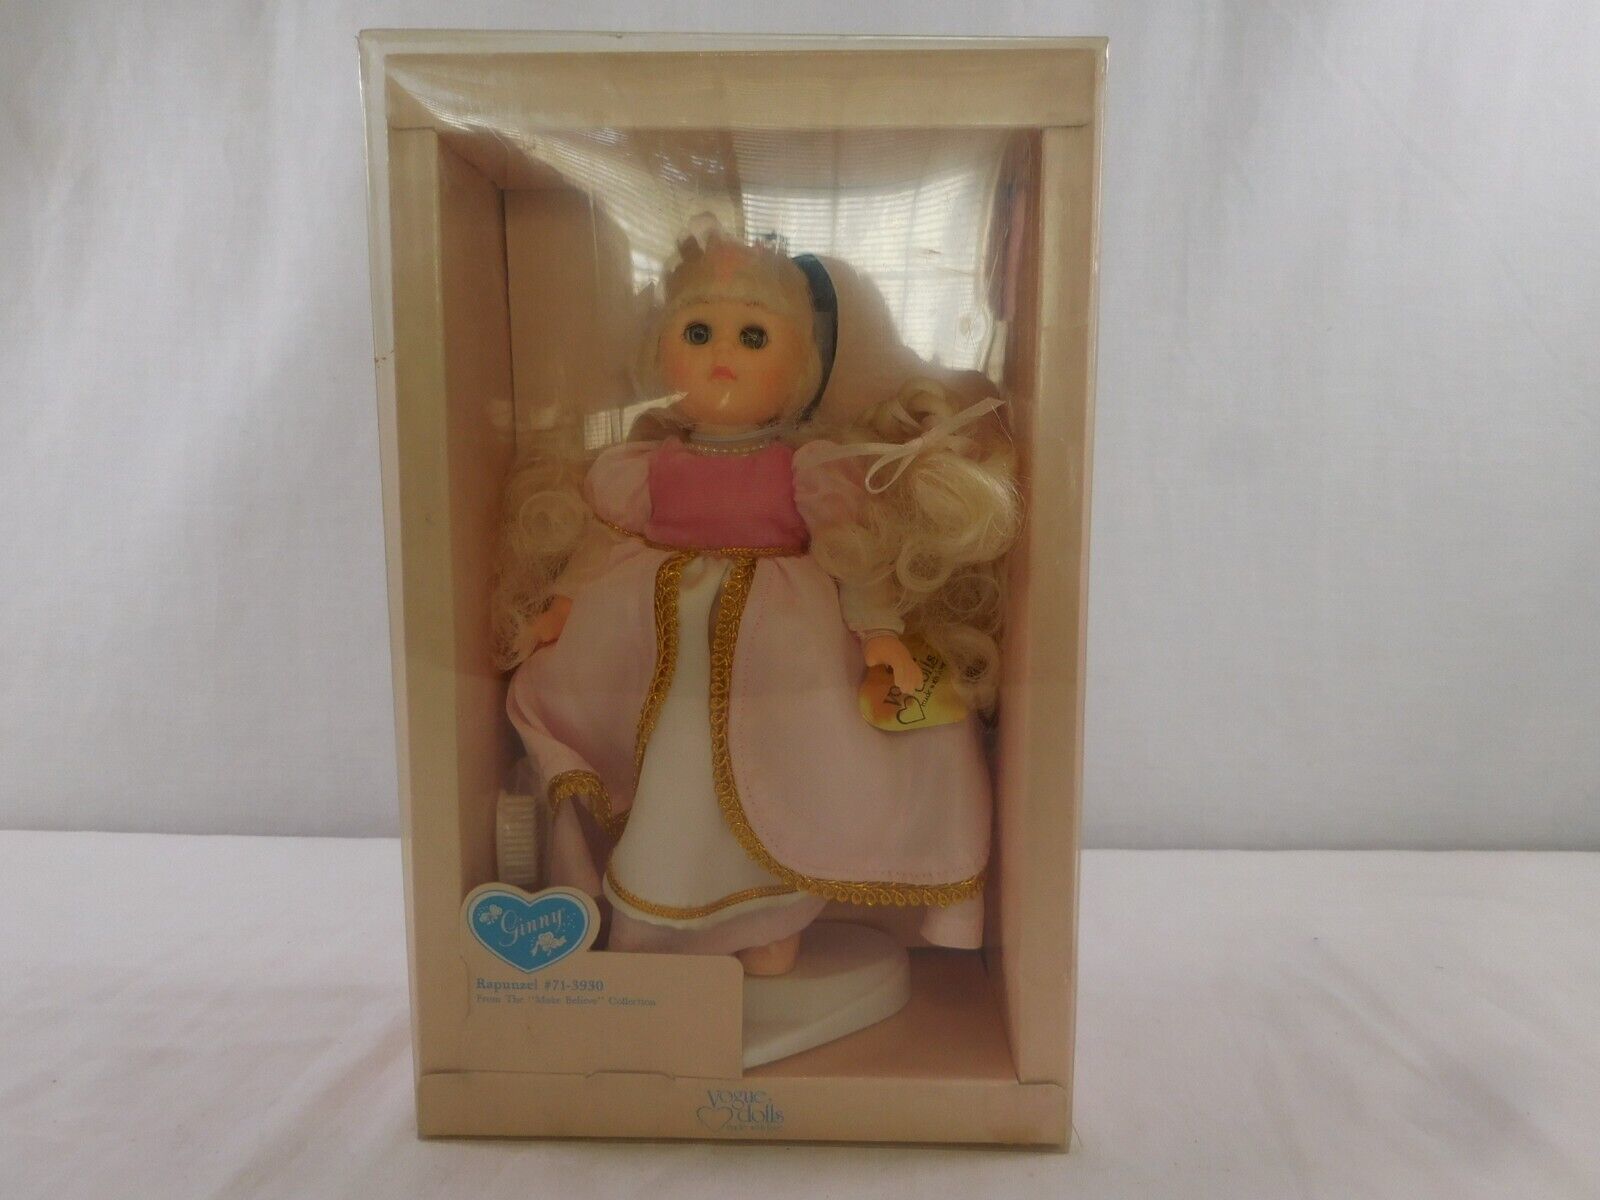 Ginny Vogue "Rapunzel" Make Believe Collection Collectible 8" Doll - $12.90